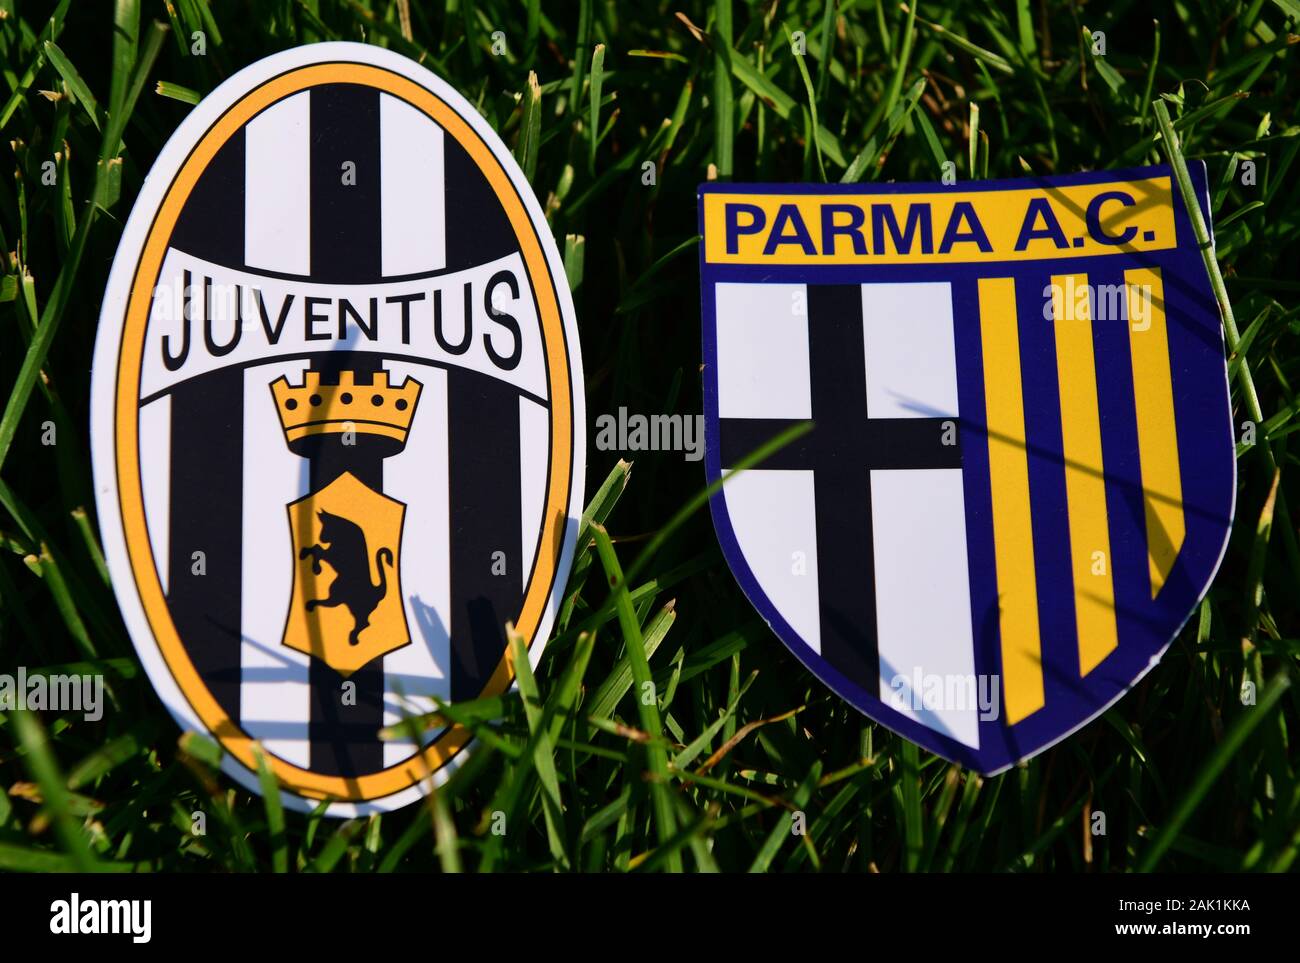 September 6, 2019, Turin, Italy. Emblems of Italian football clubs Juventus Turin and Parma on the green grass of the lawn. Stock Photo